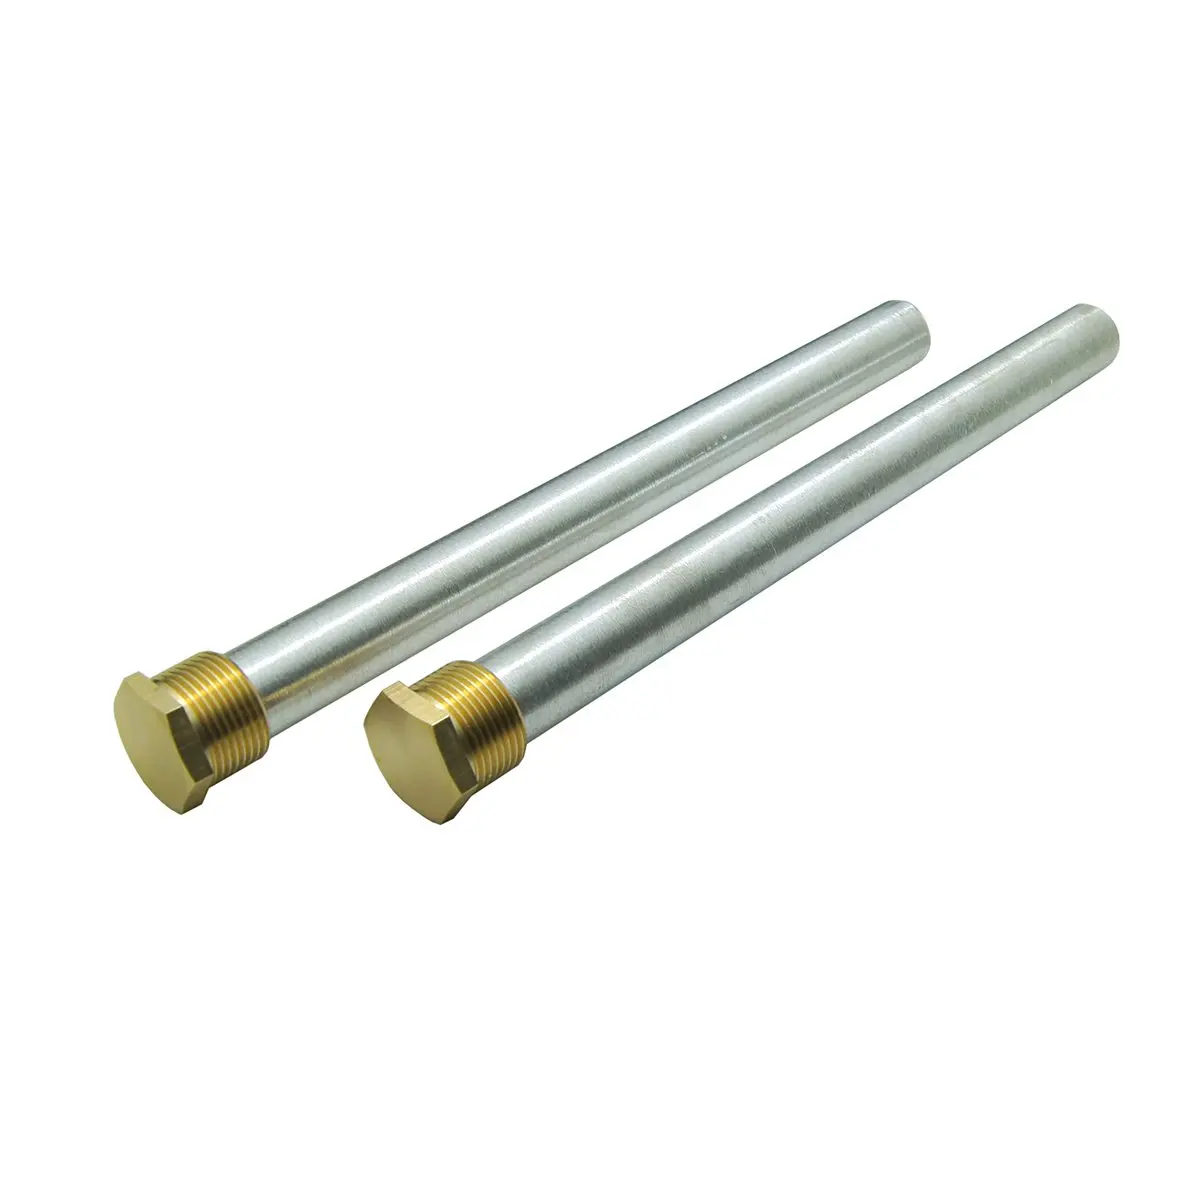 Cheap Water Heater Anode Lowes Find Water Heater Anode Lowes